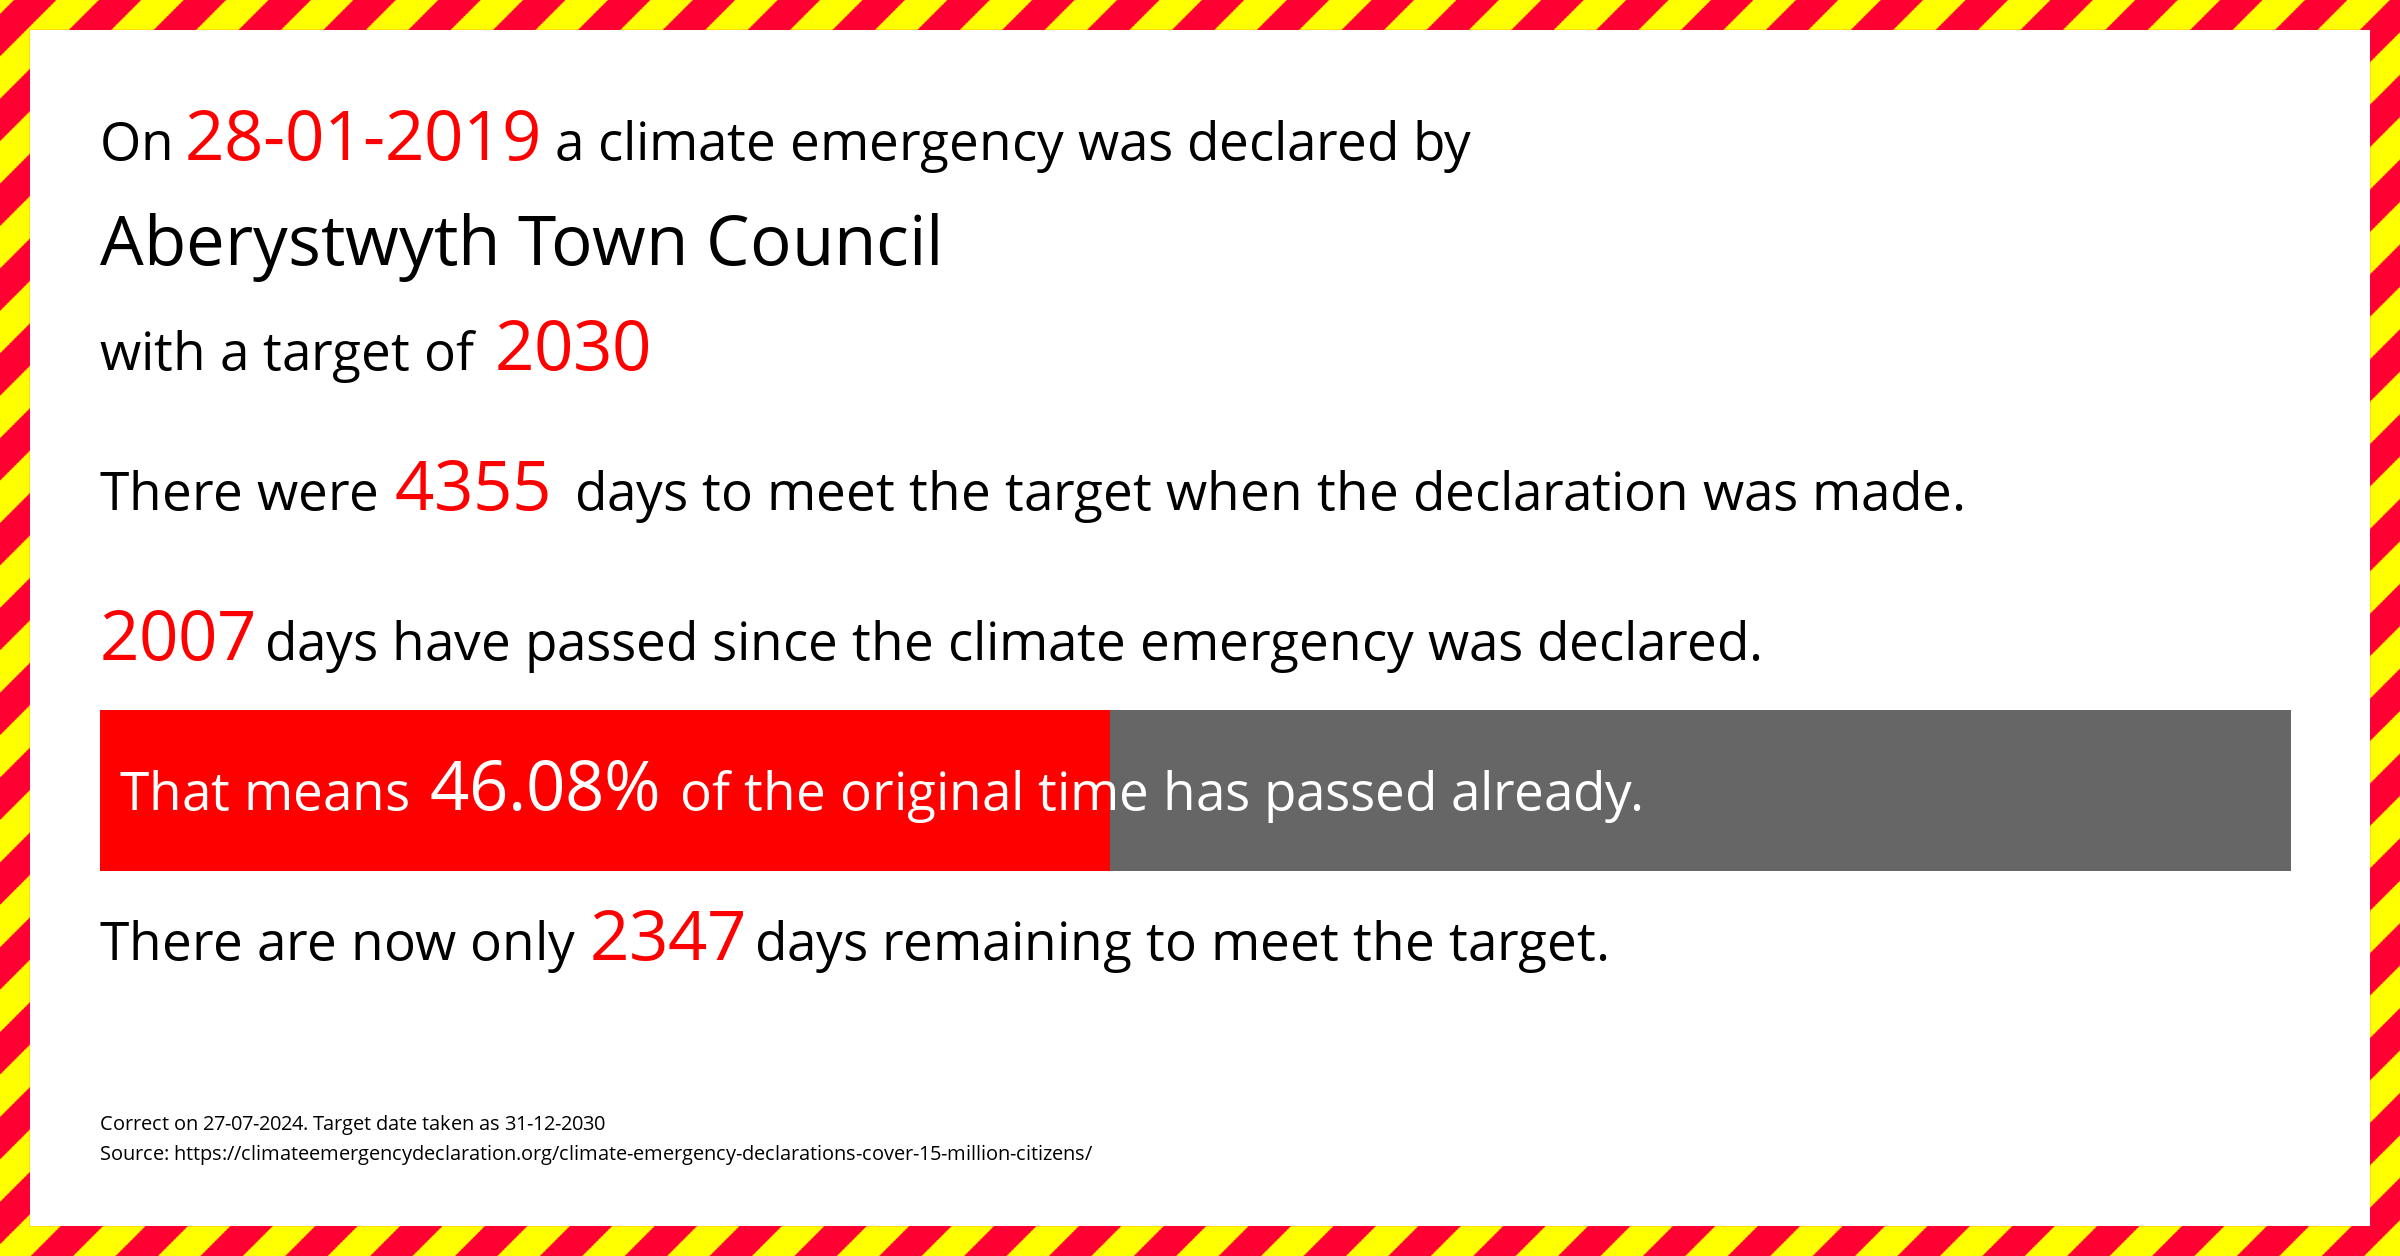 Aberystwyth Town Council declared a Climate emergency on Monday 28th January 2019, with a target of 2030.